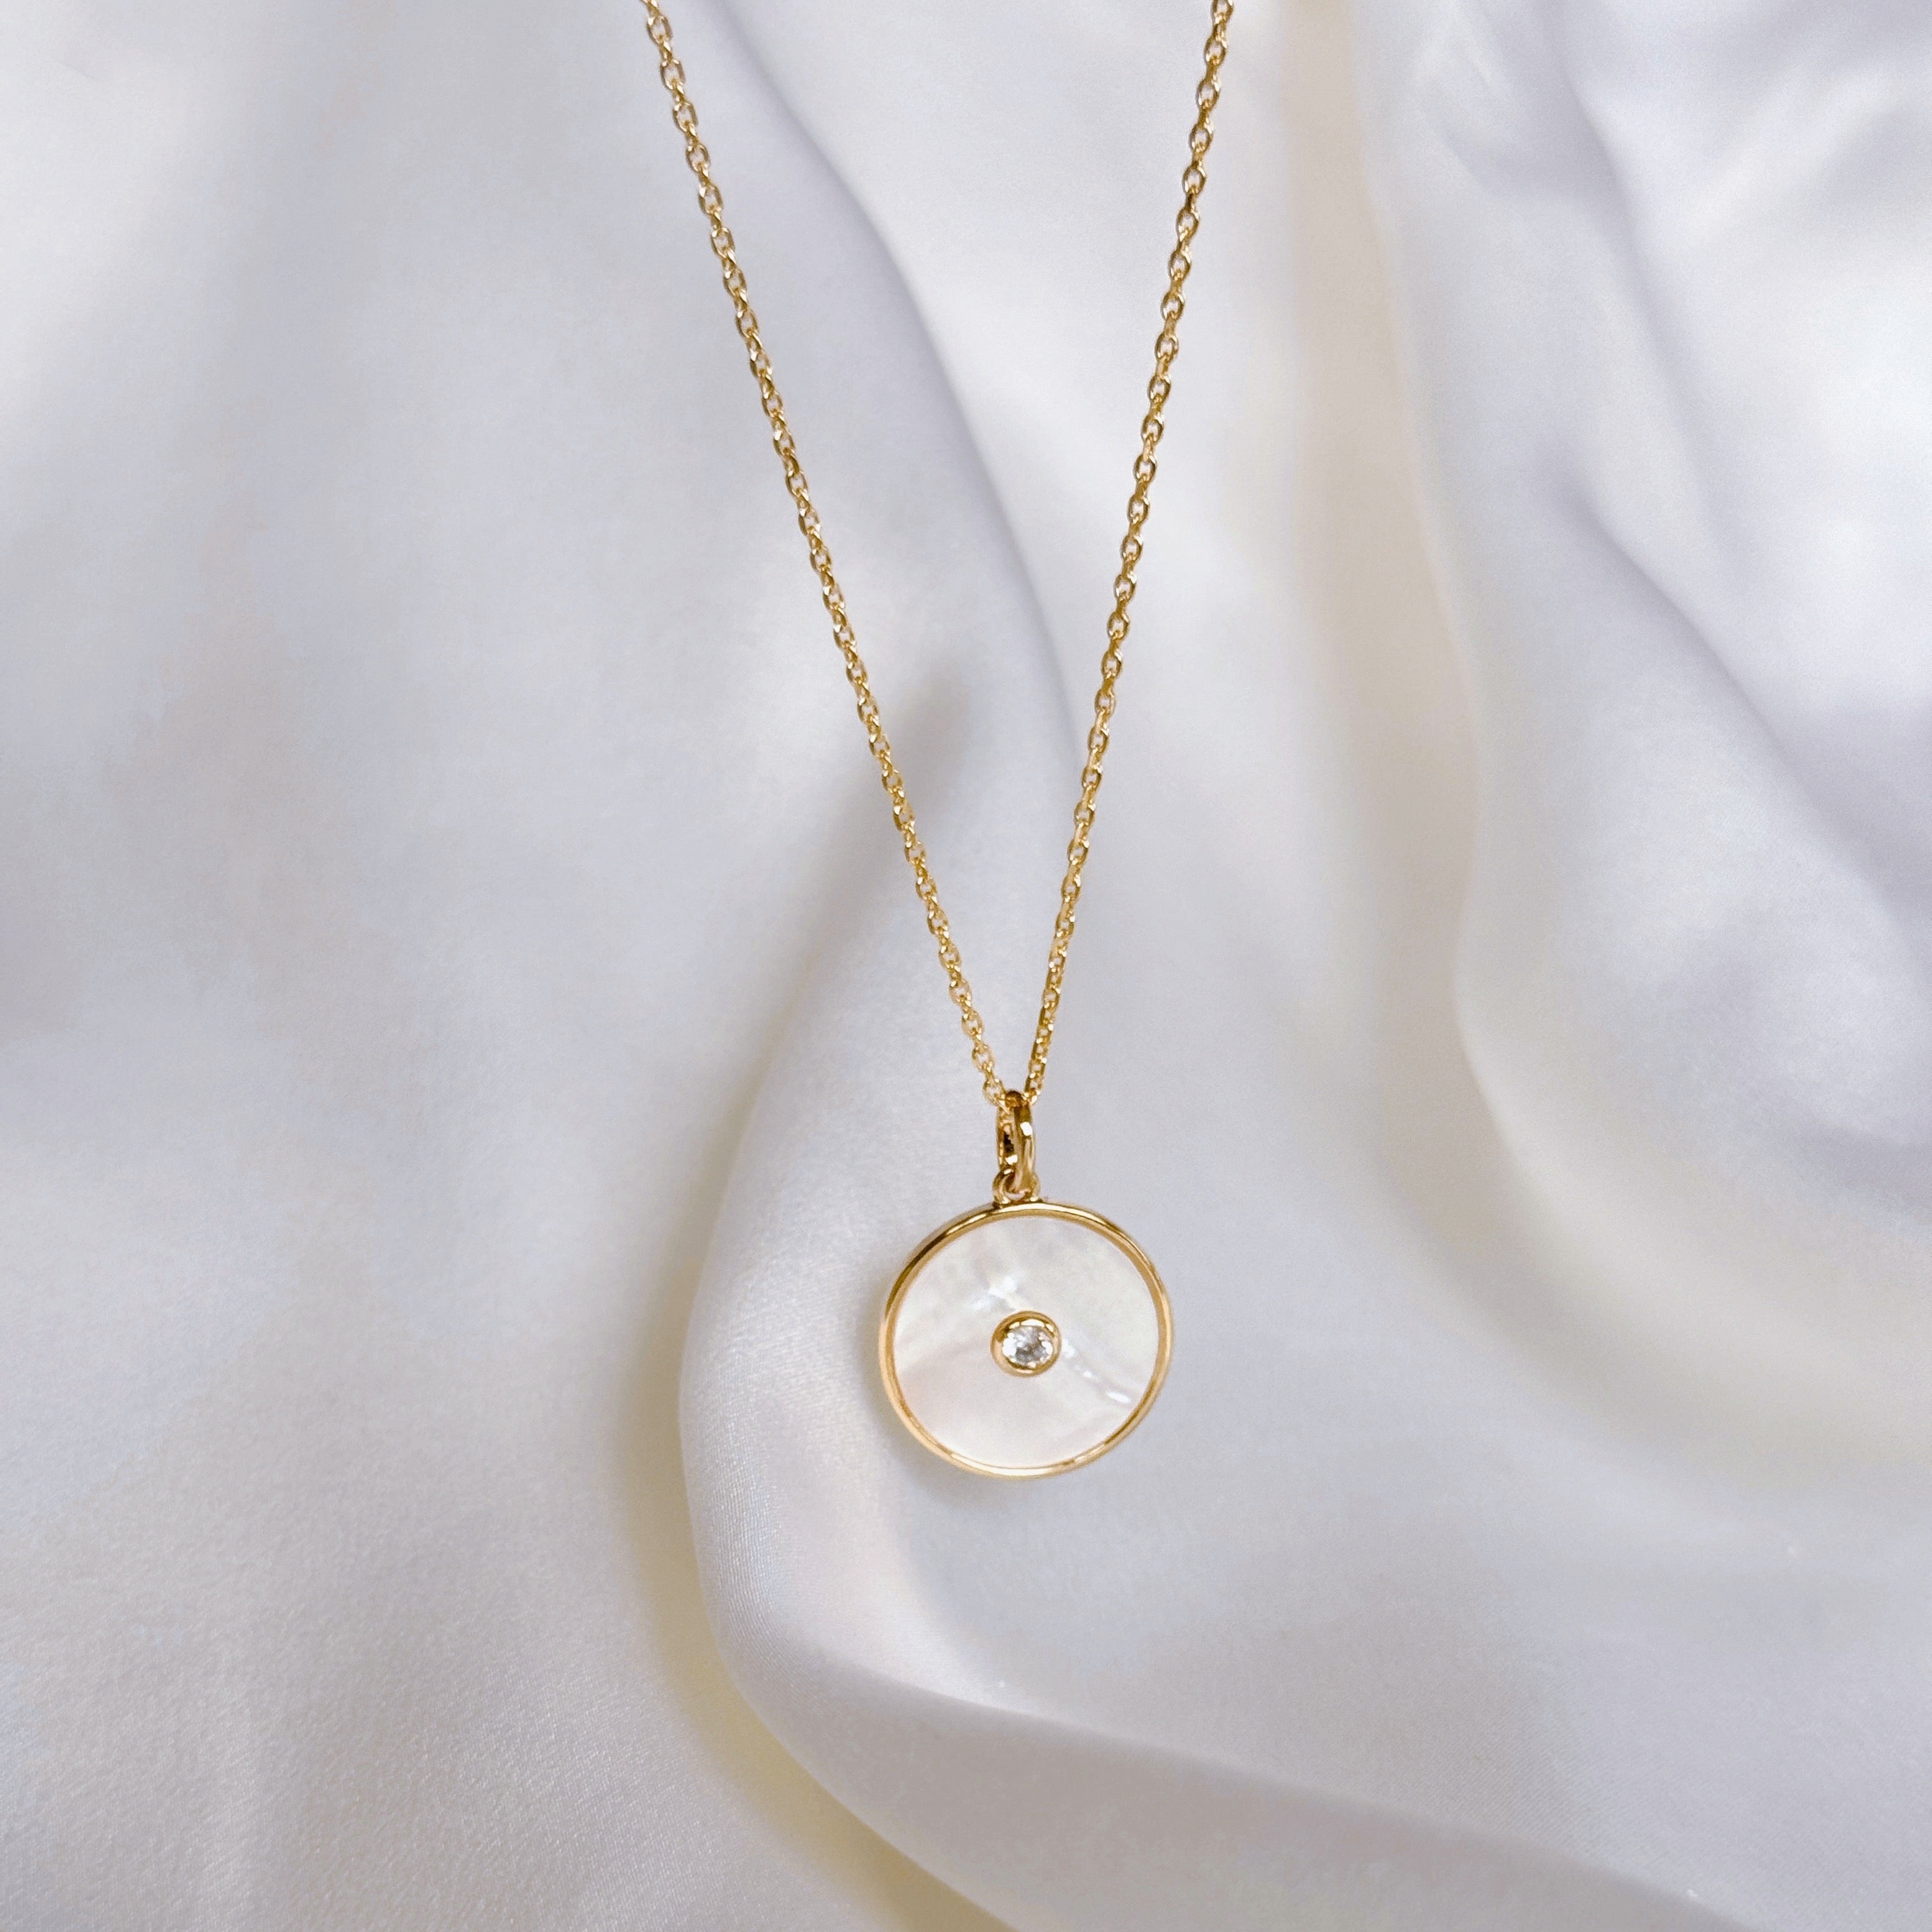 Gold-plated “Pearly medal” necklace